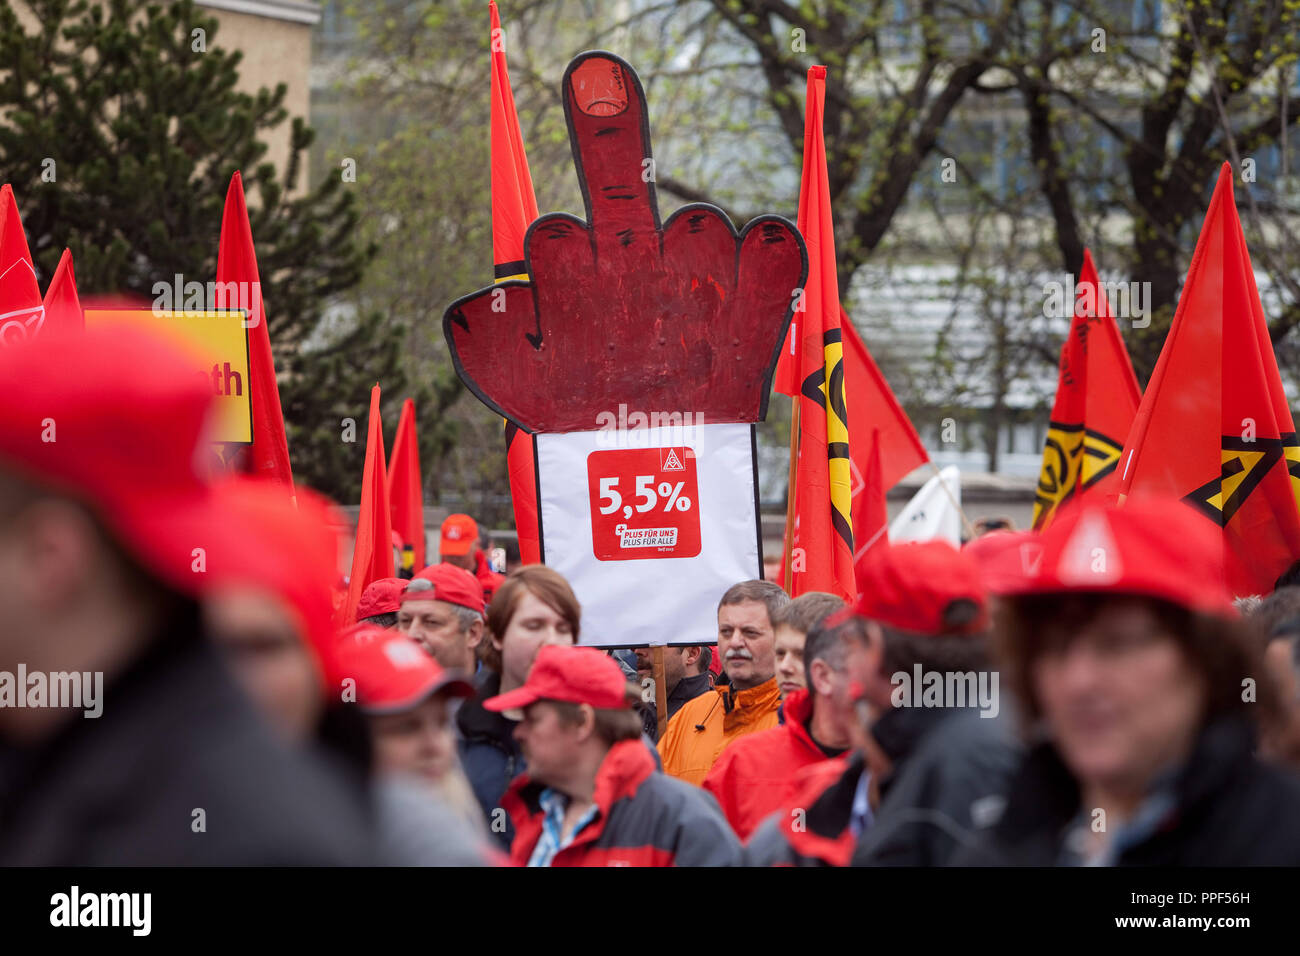 Metal workers fight for a wage increase of 5.5 percent. Stock Photo